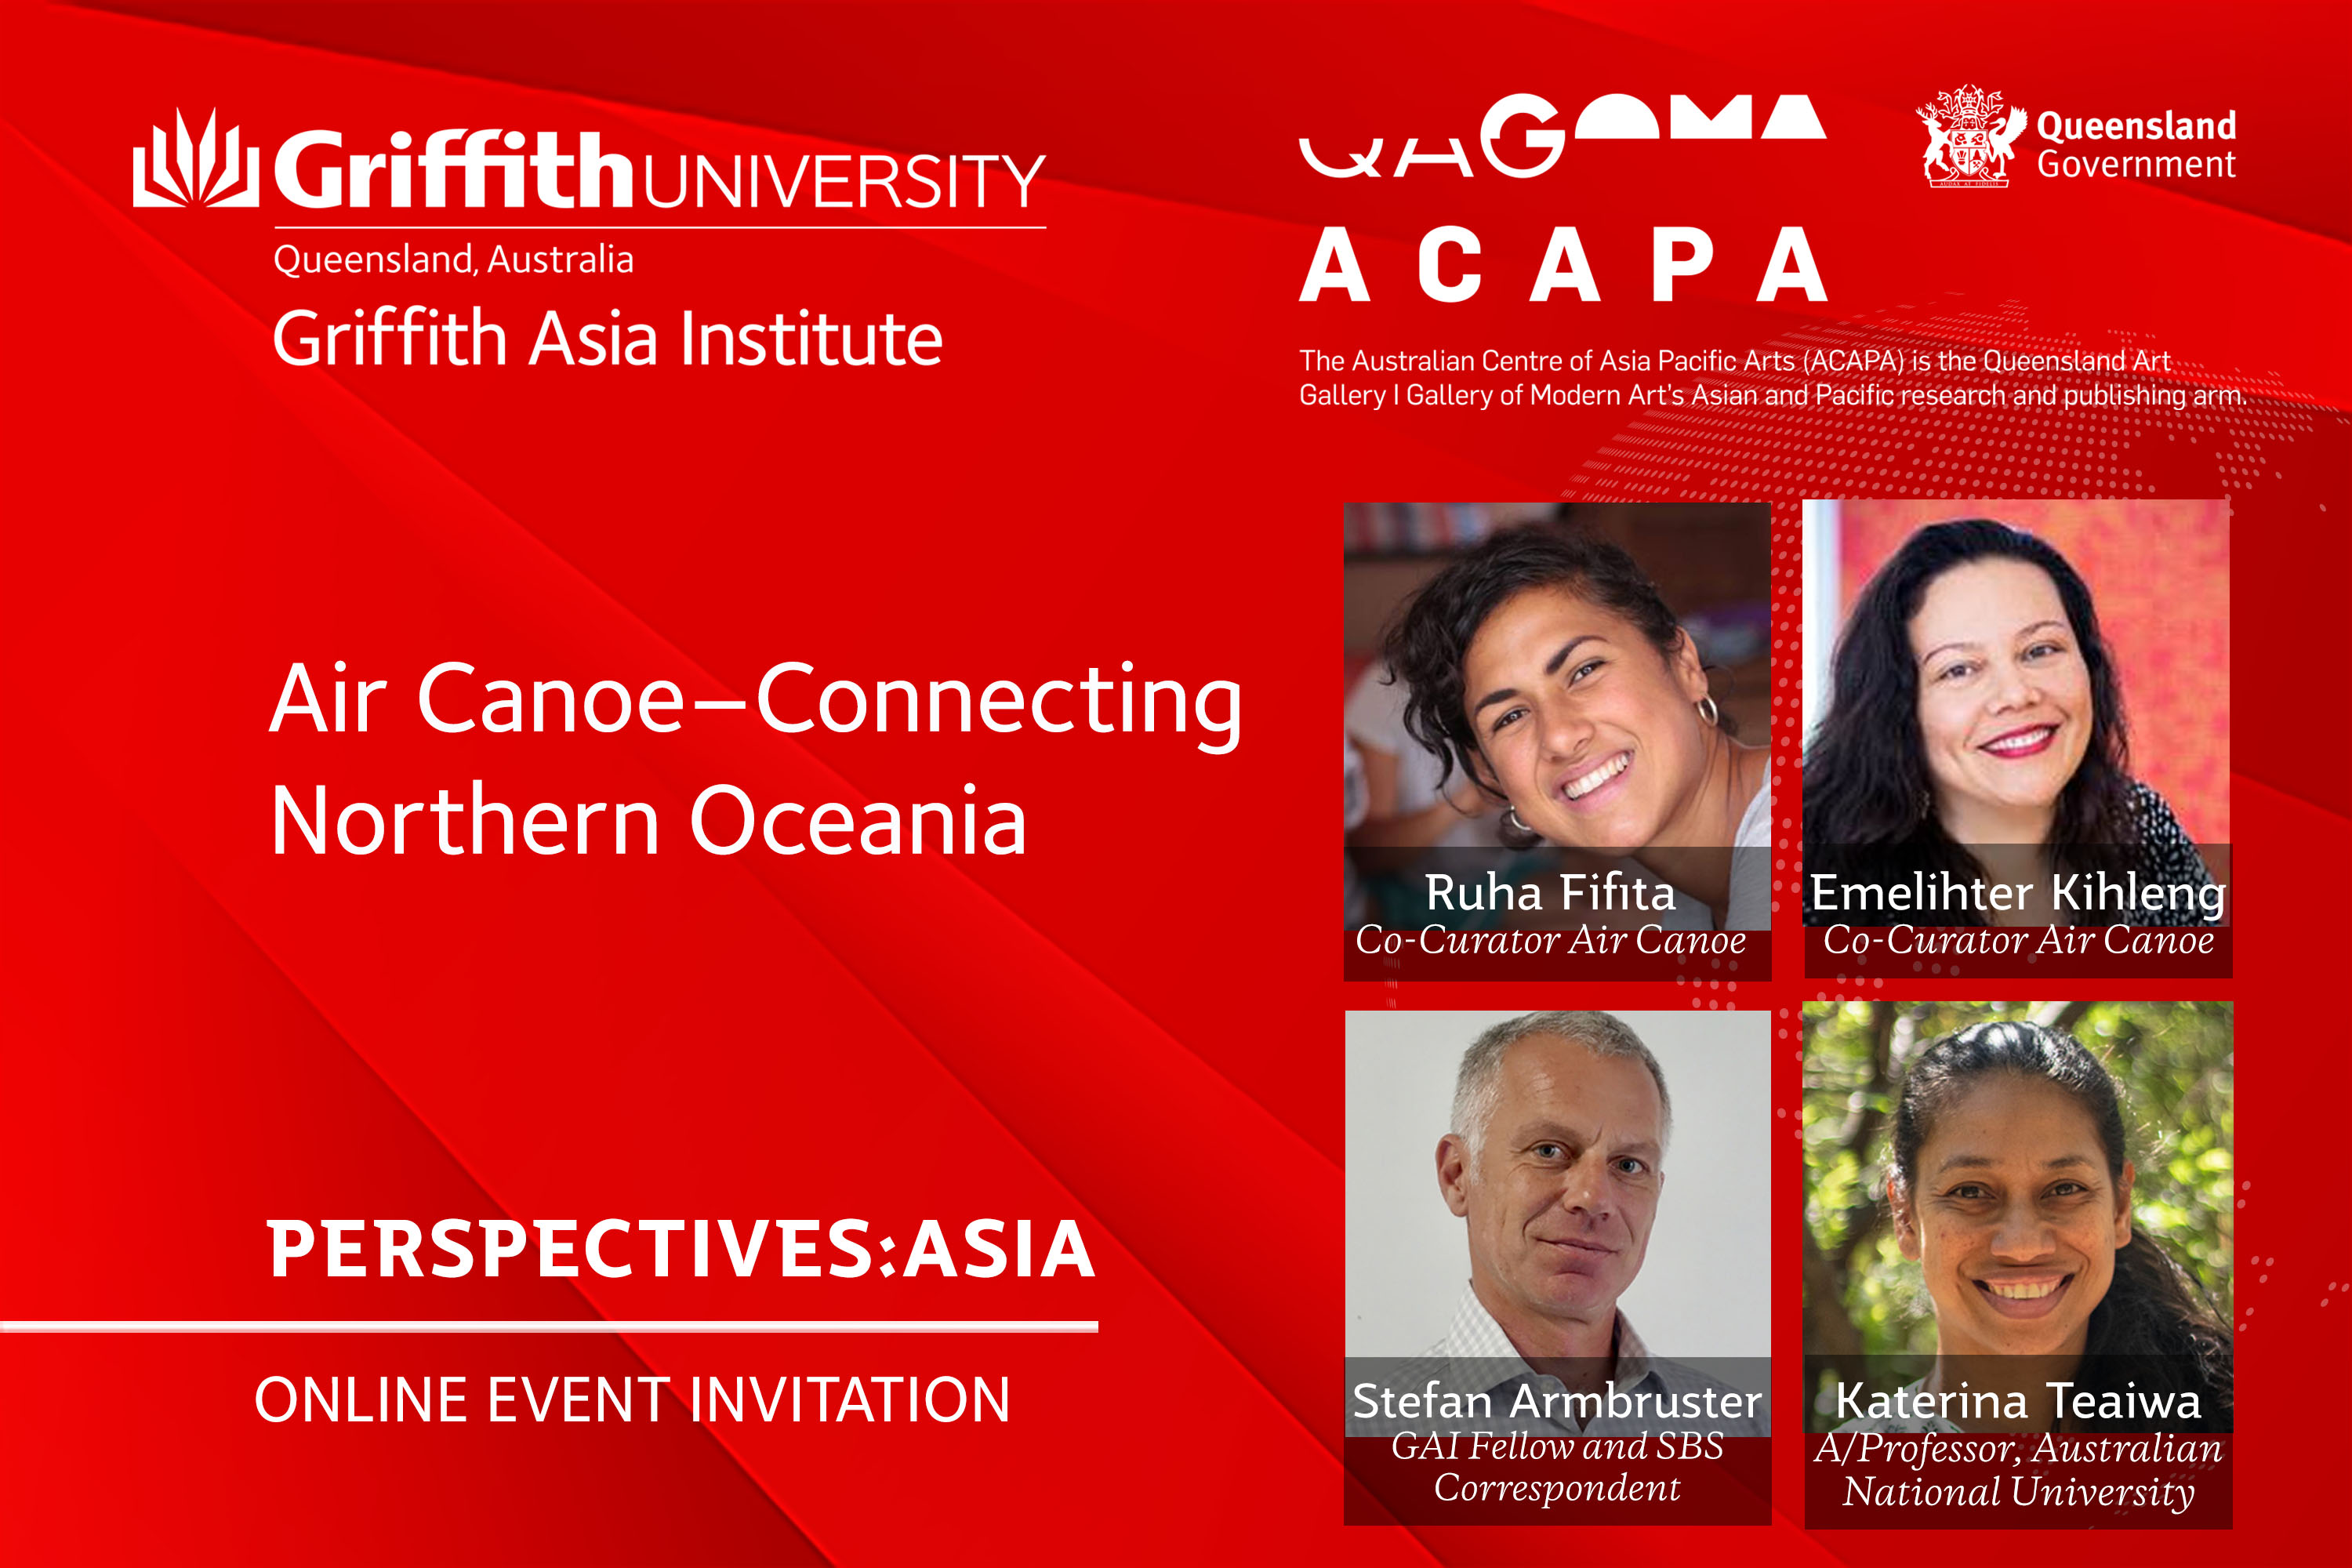 Perspectives: Asia | Air Canoe - Connecting Northern Oceania